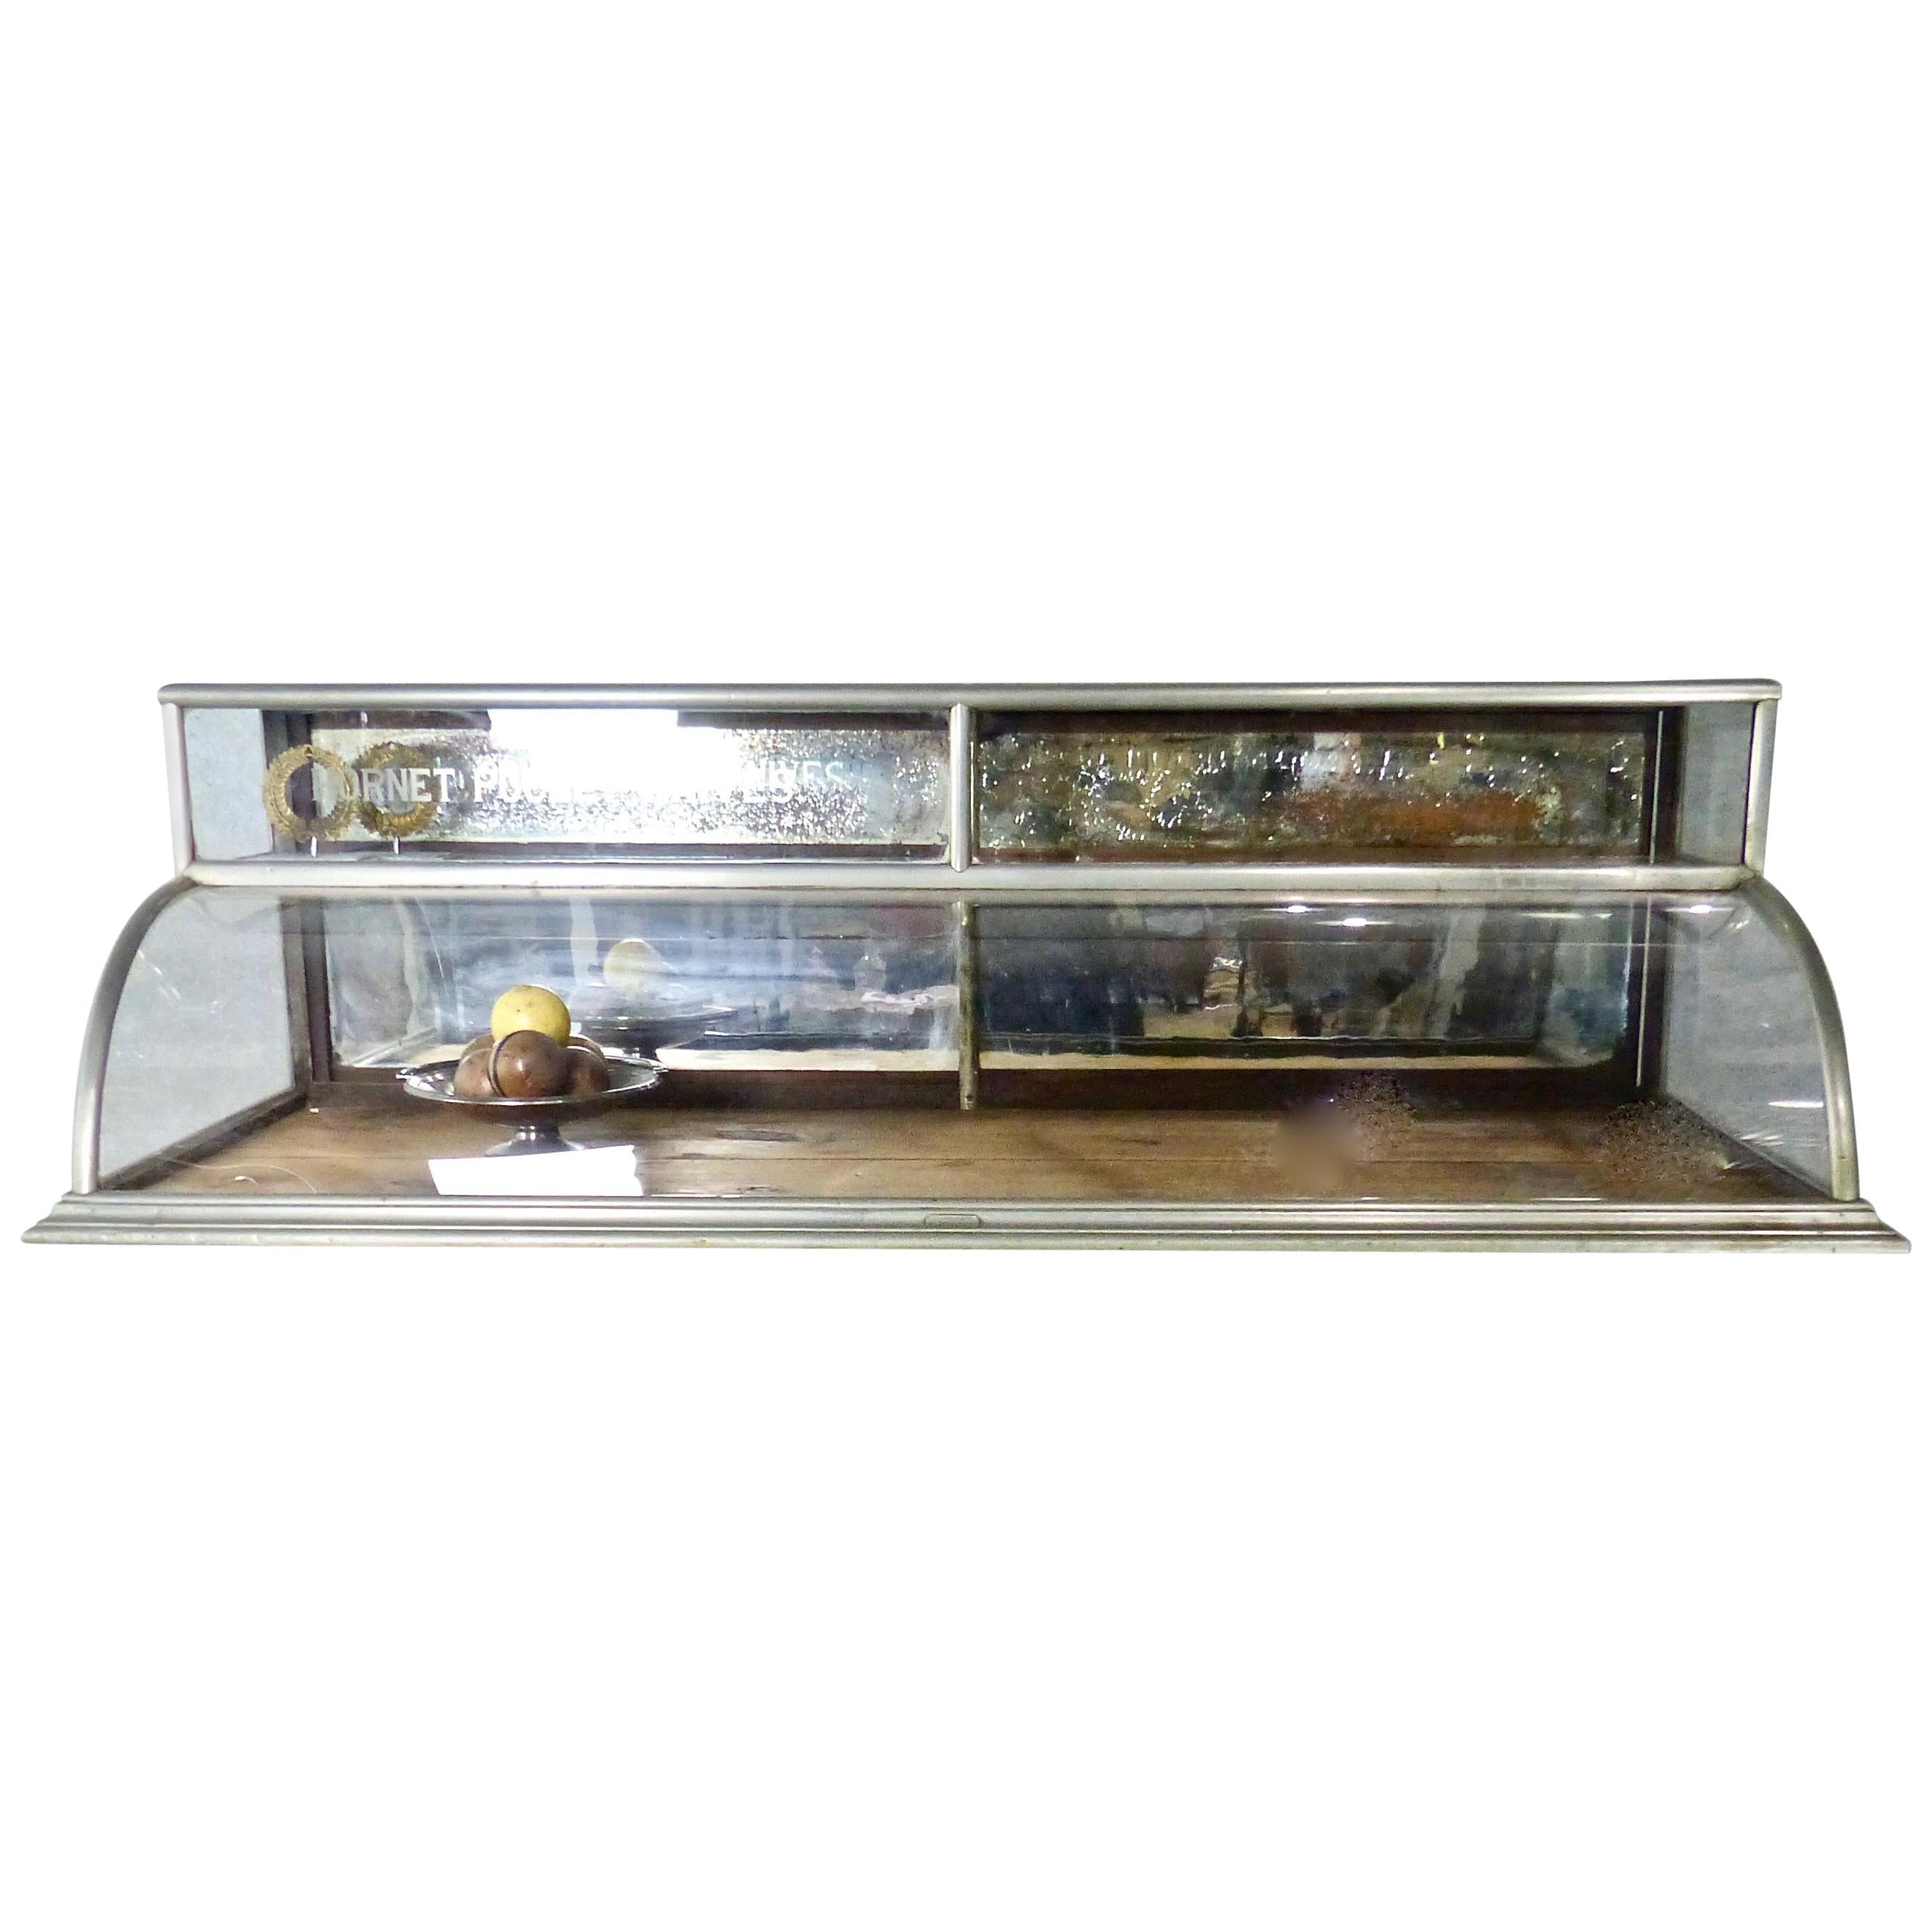 Two-Tiered Nickel-Plated Countertop Display Case, circa 1920